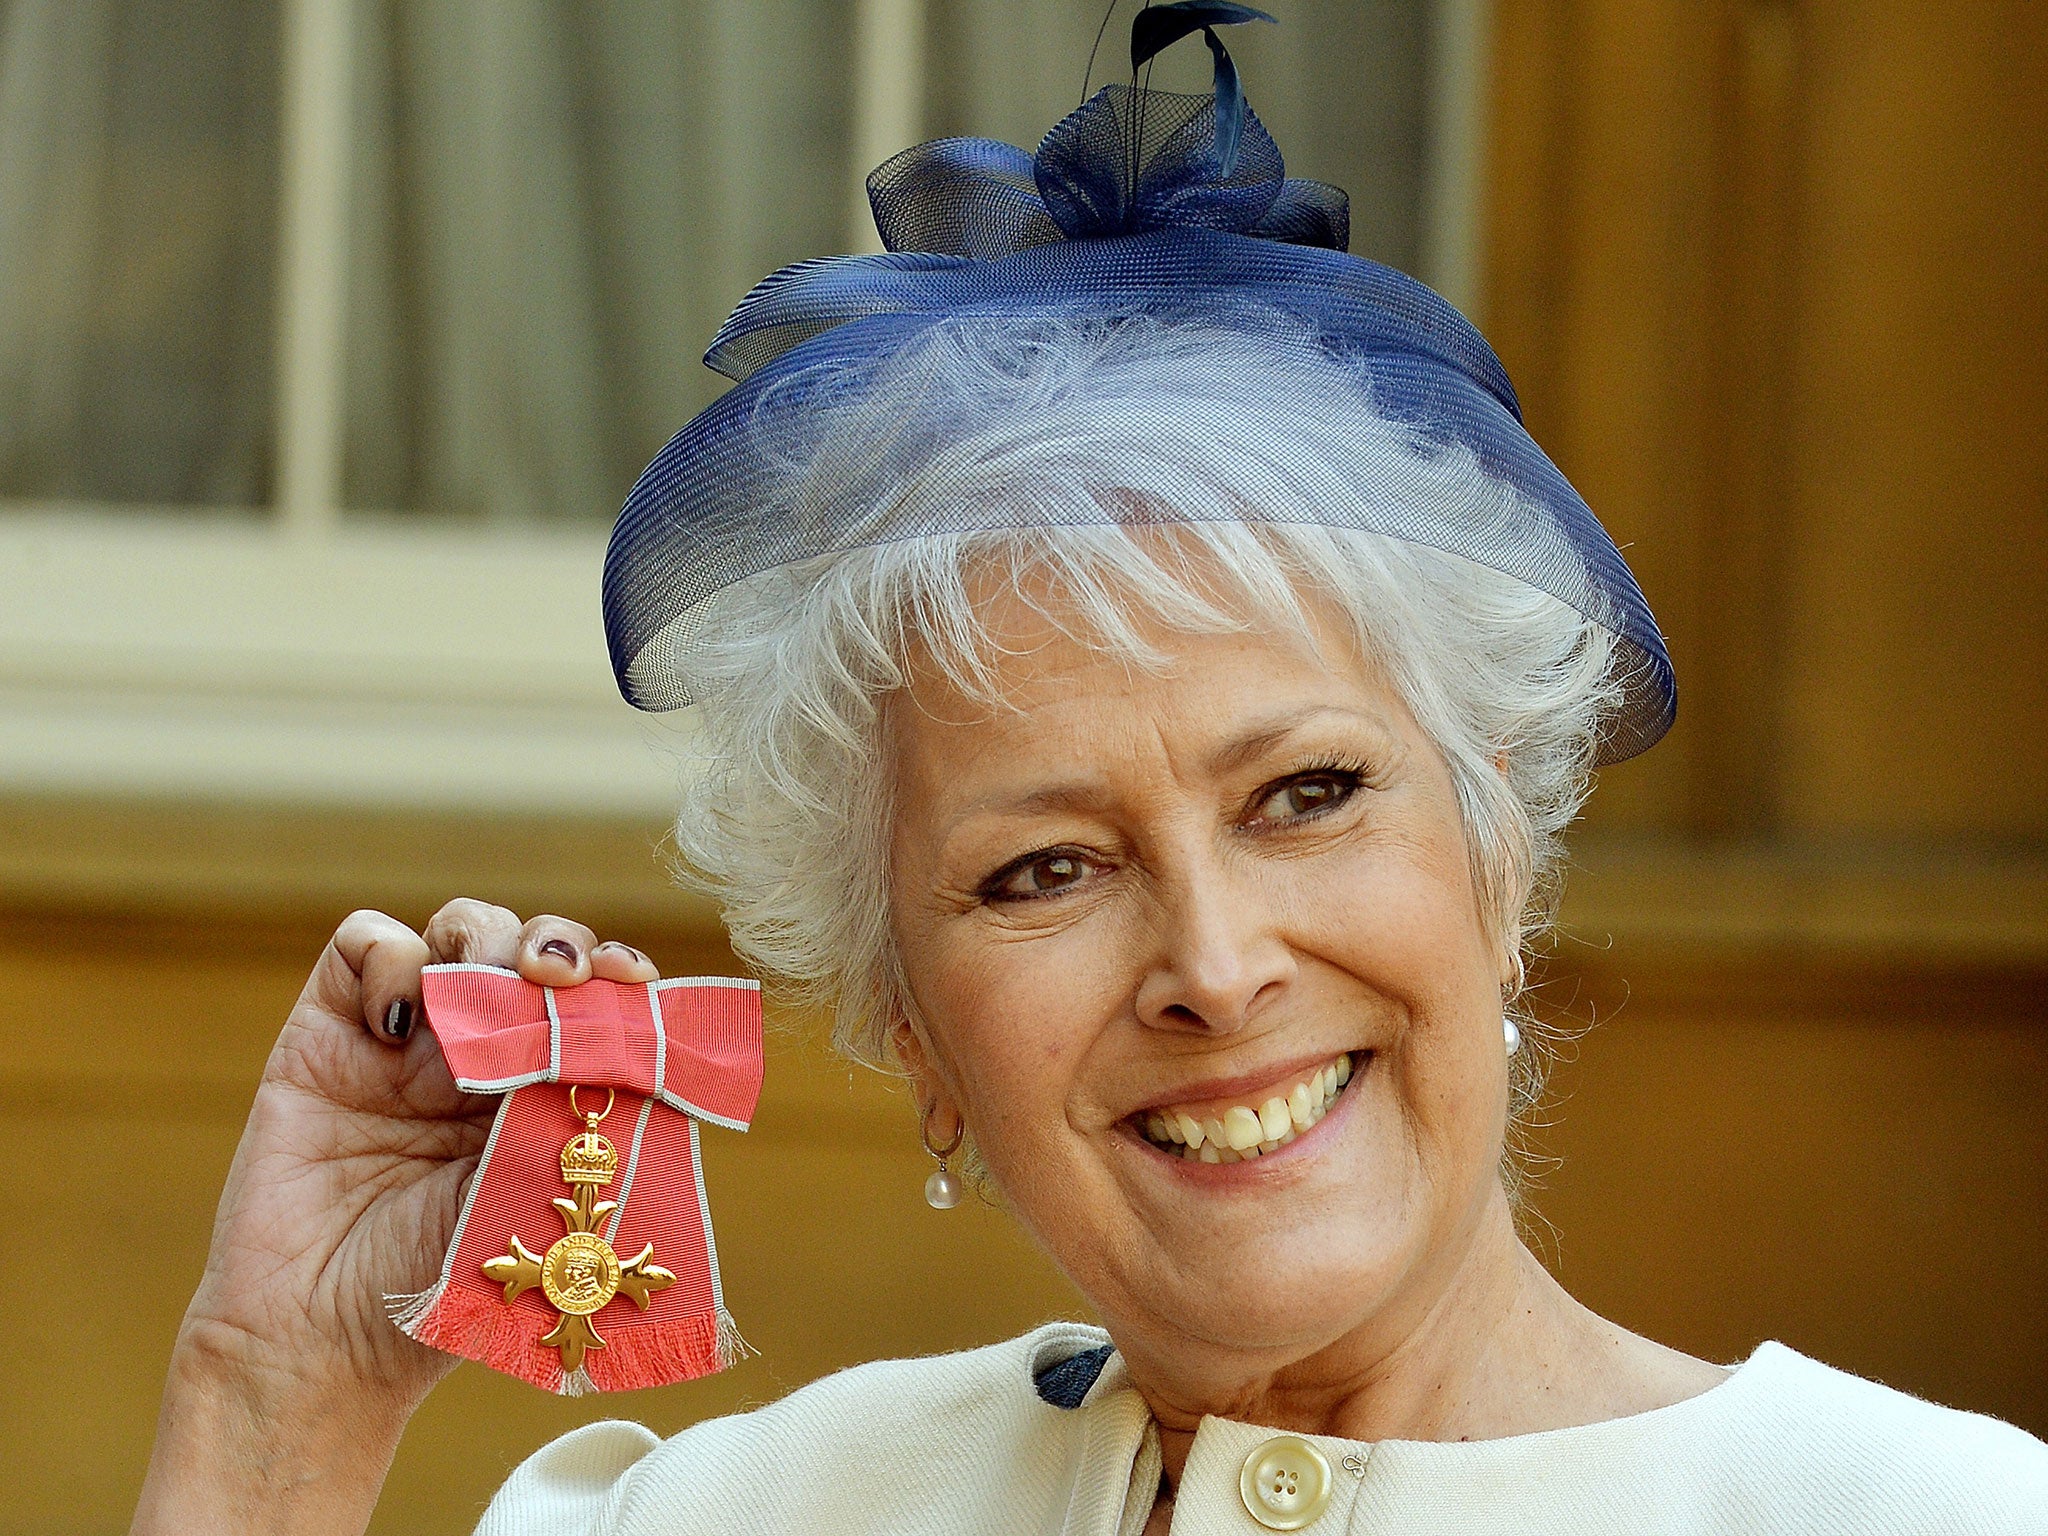 Lynda Bellingham Dead Watch Actress In Final Interviews I Don T Want To Die A Sad Old Lady